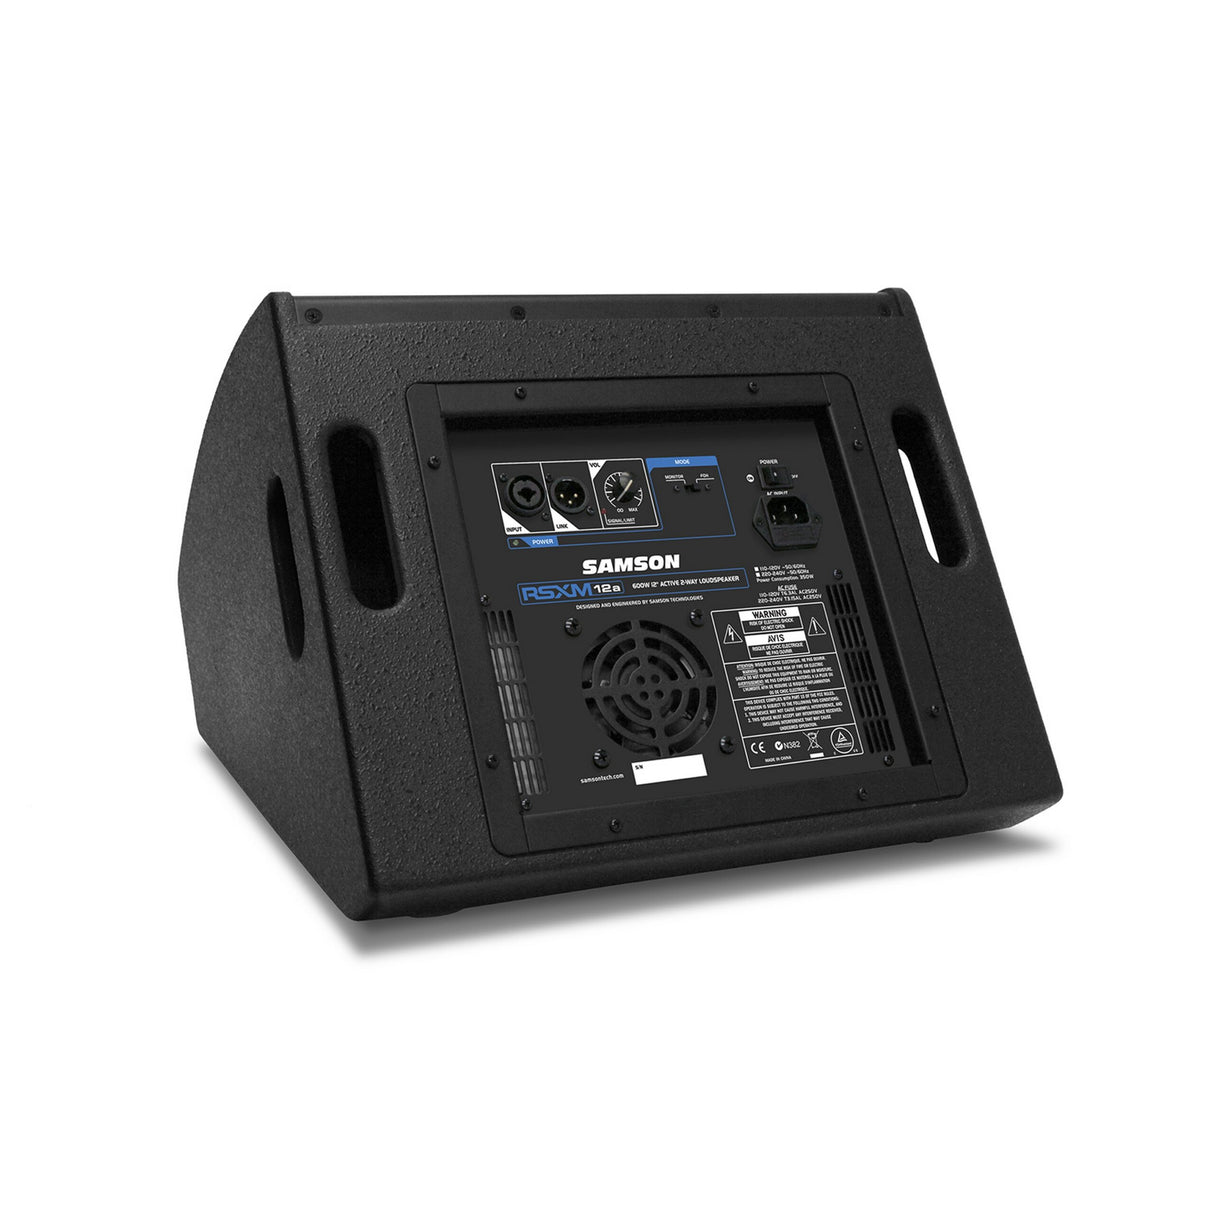 Samson RSXM12A 800W 2-Way Active Stage Monitor